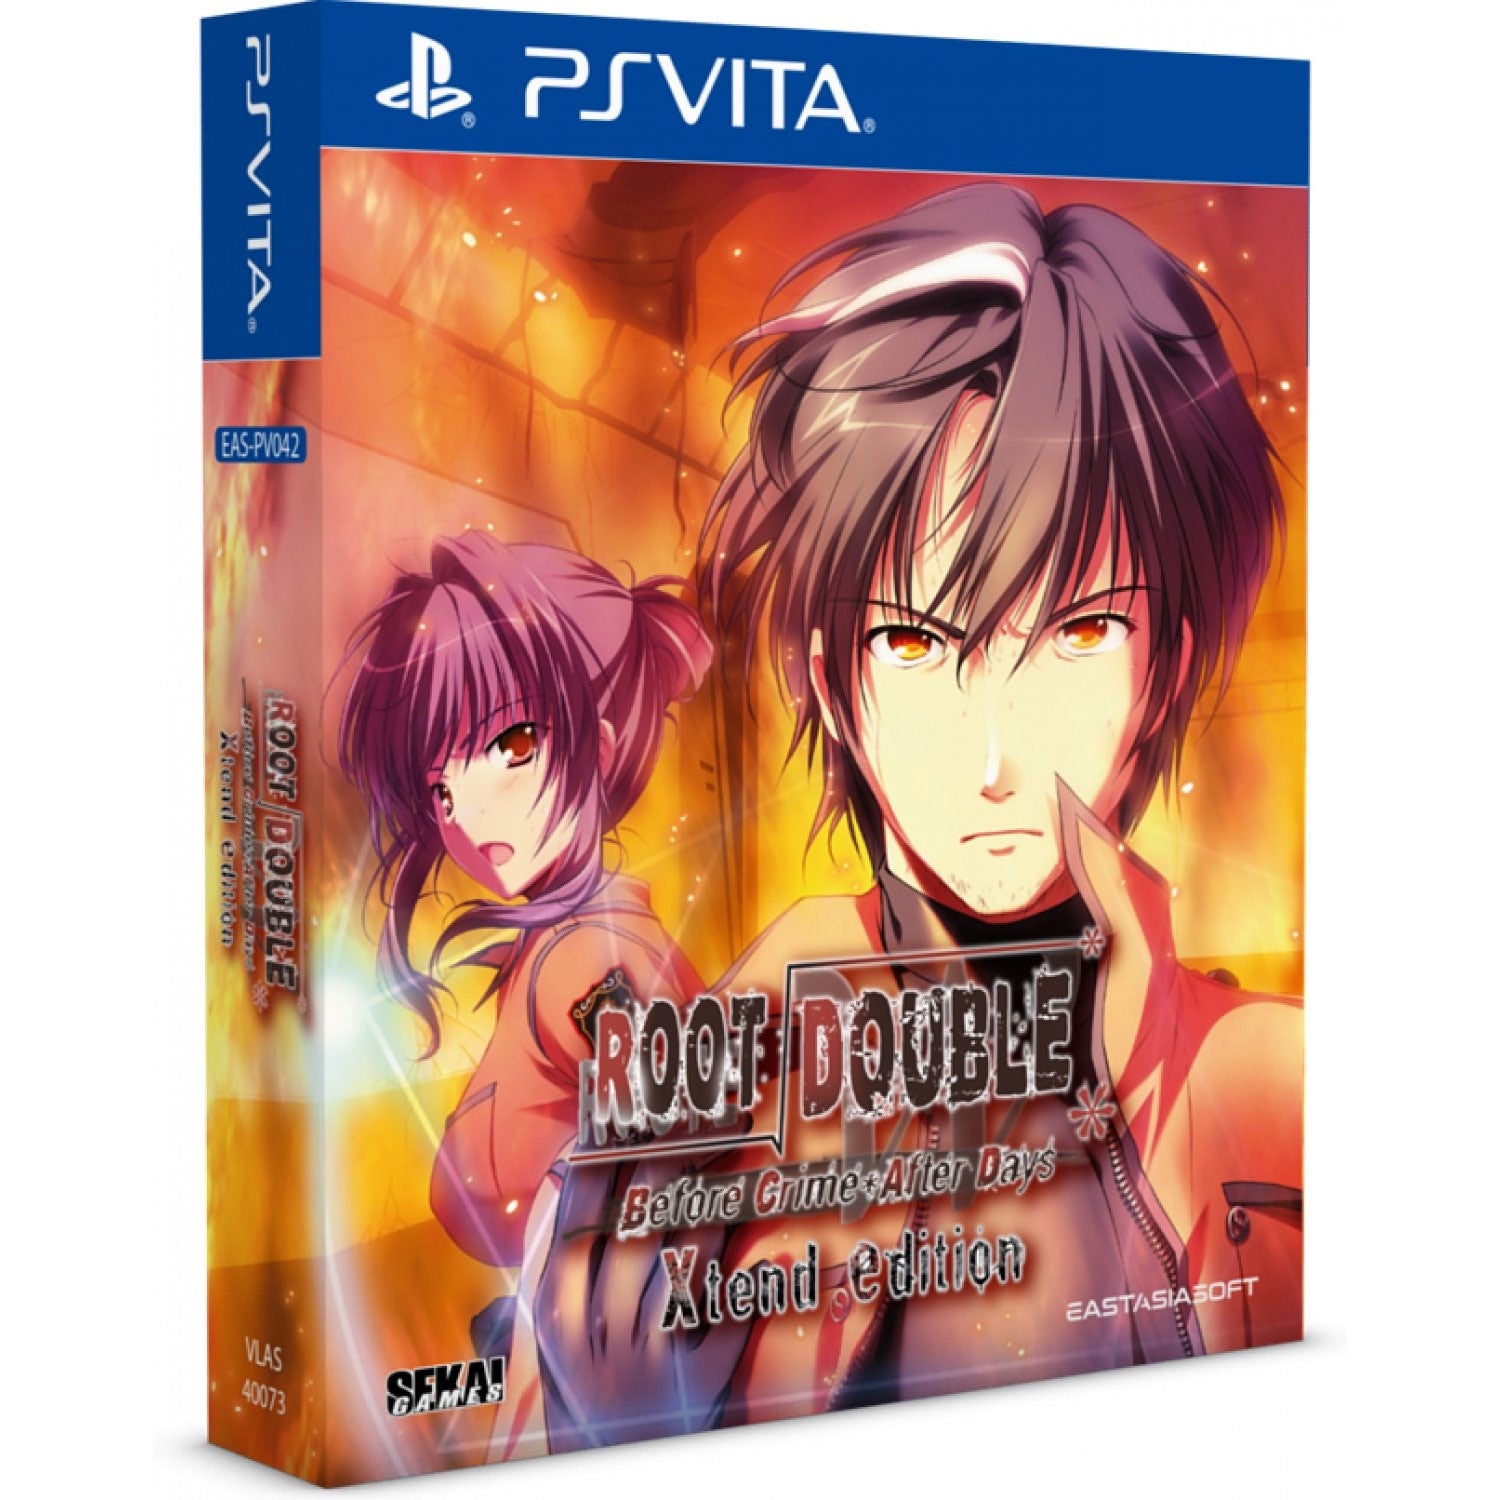 Root Double: Before Crime * After Days Xtend Edition [LIMITED EDITION] - PS Vita